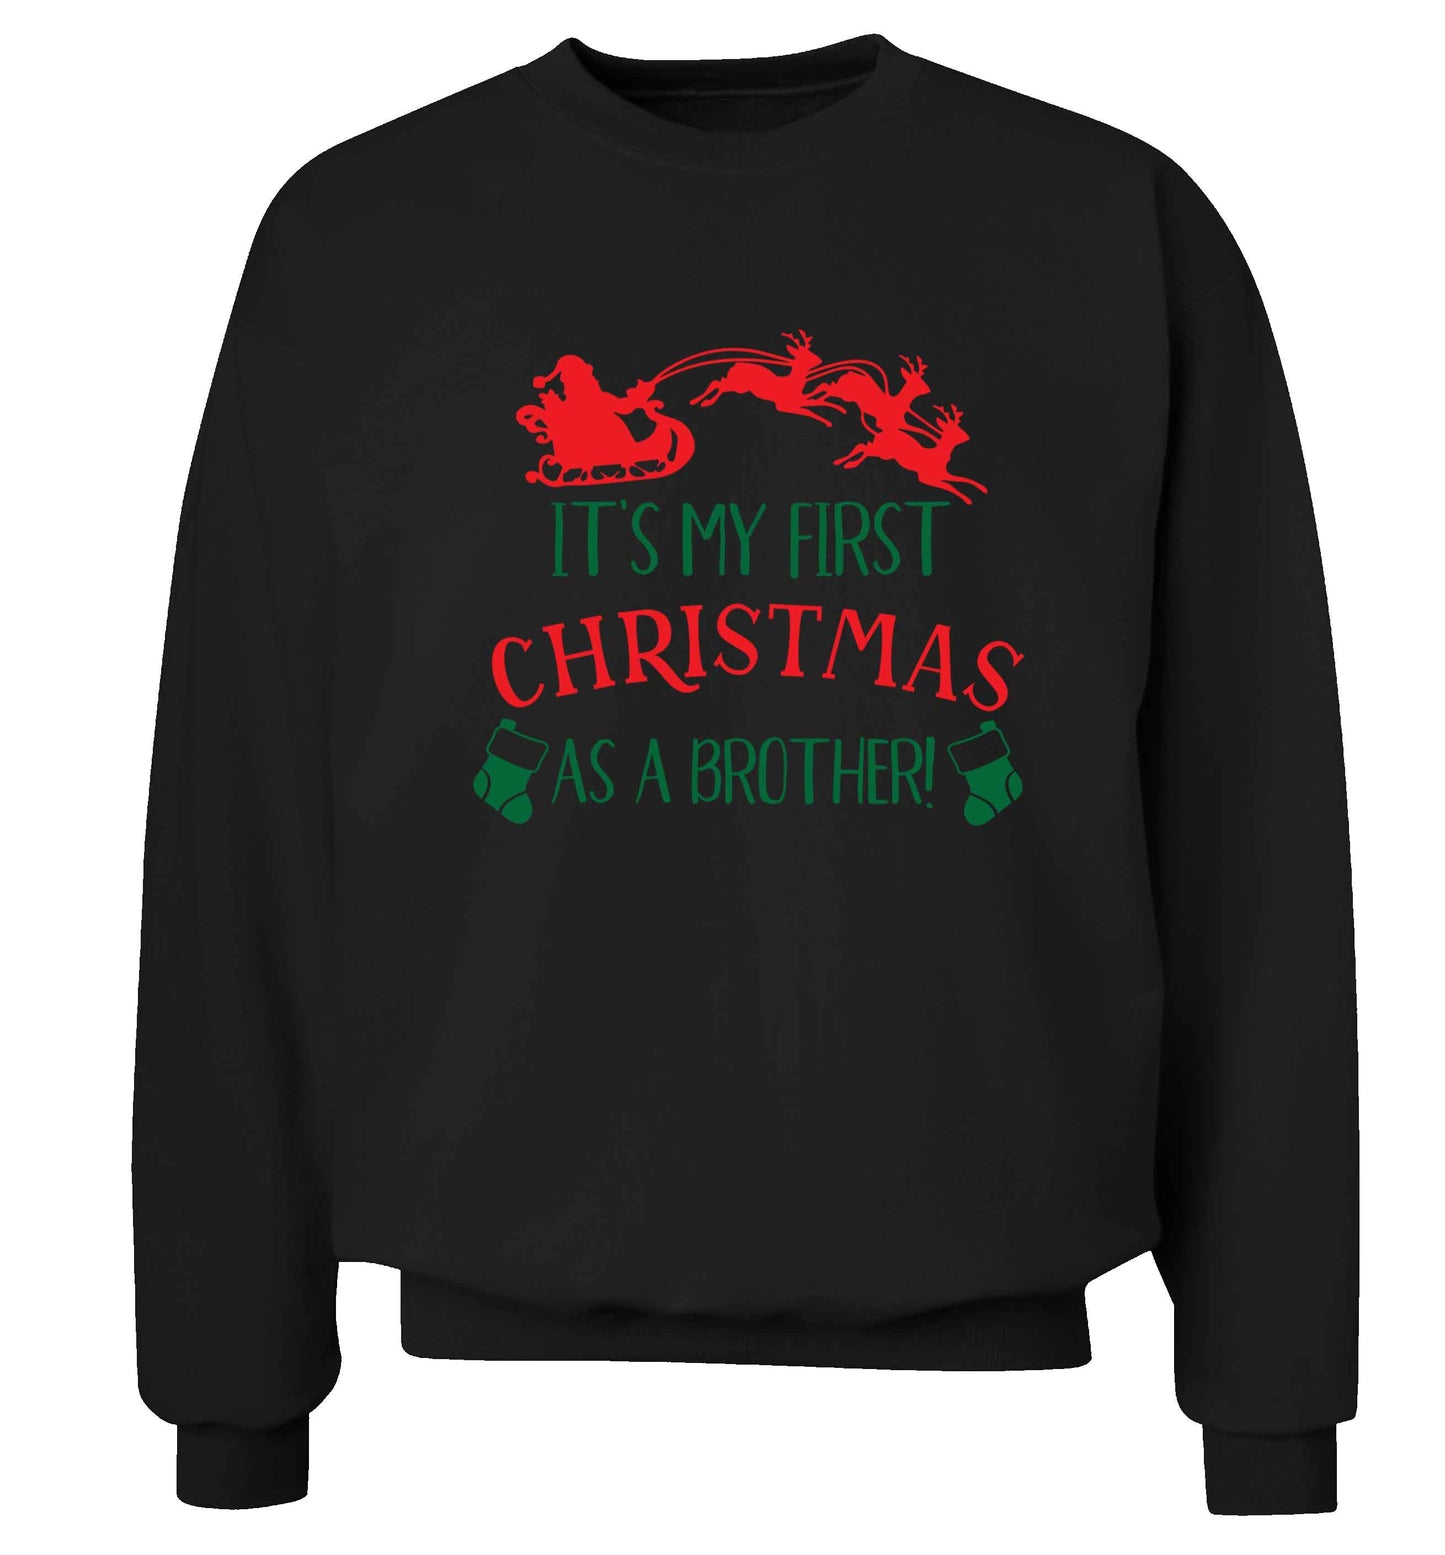 It's my first Christmas as a brother! Adult's unisex black Sweater 2XL